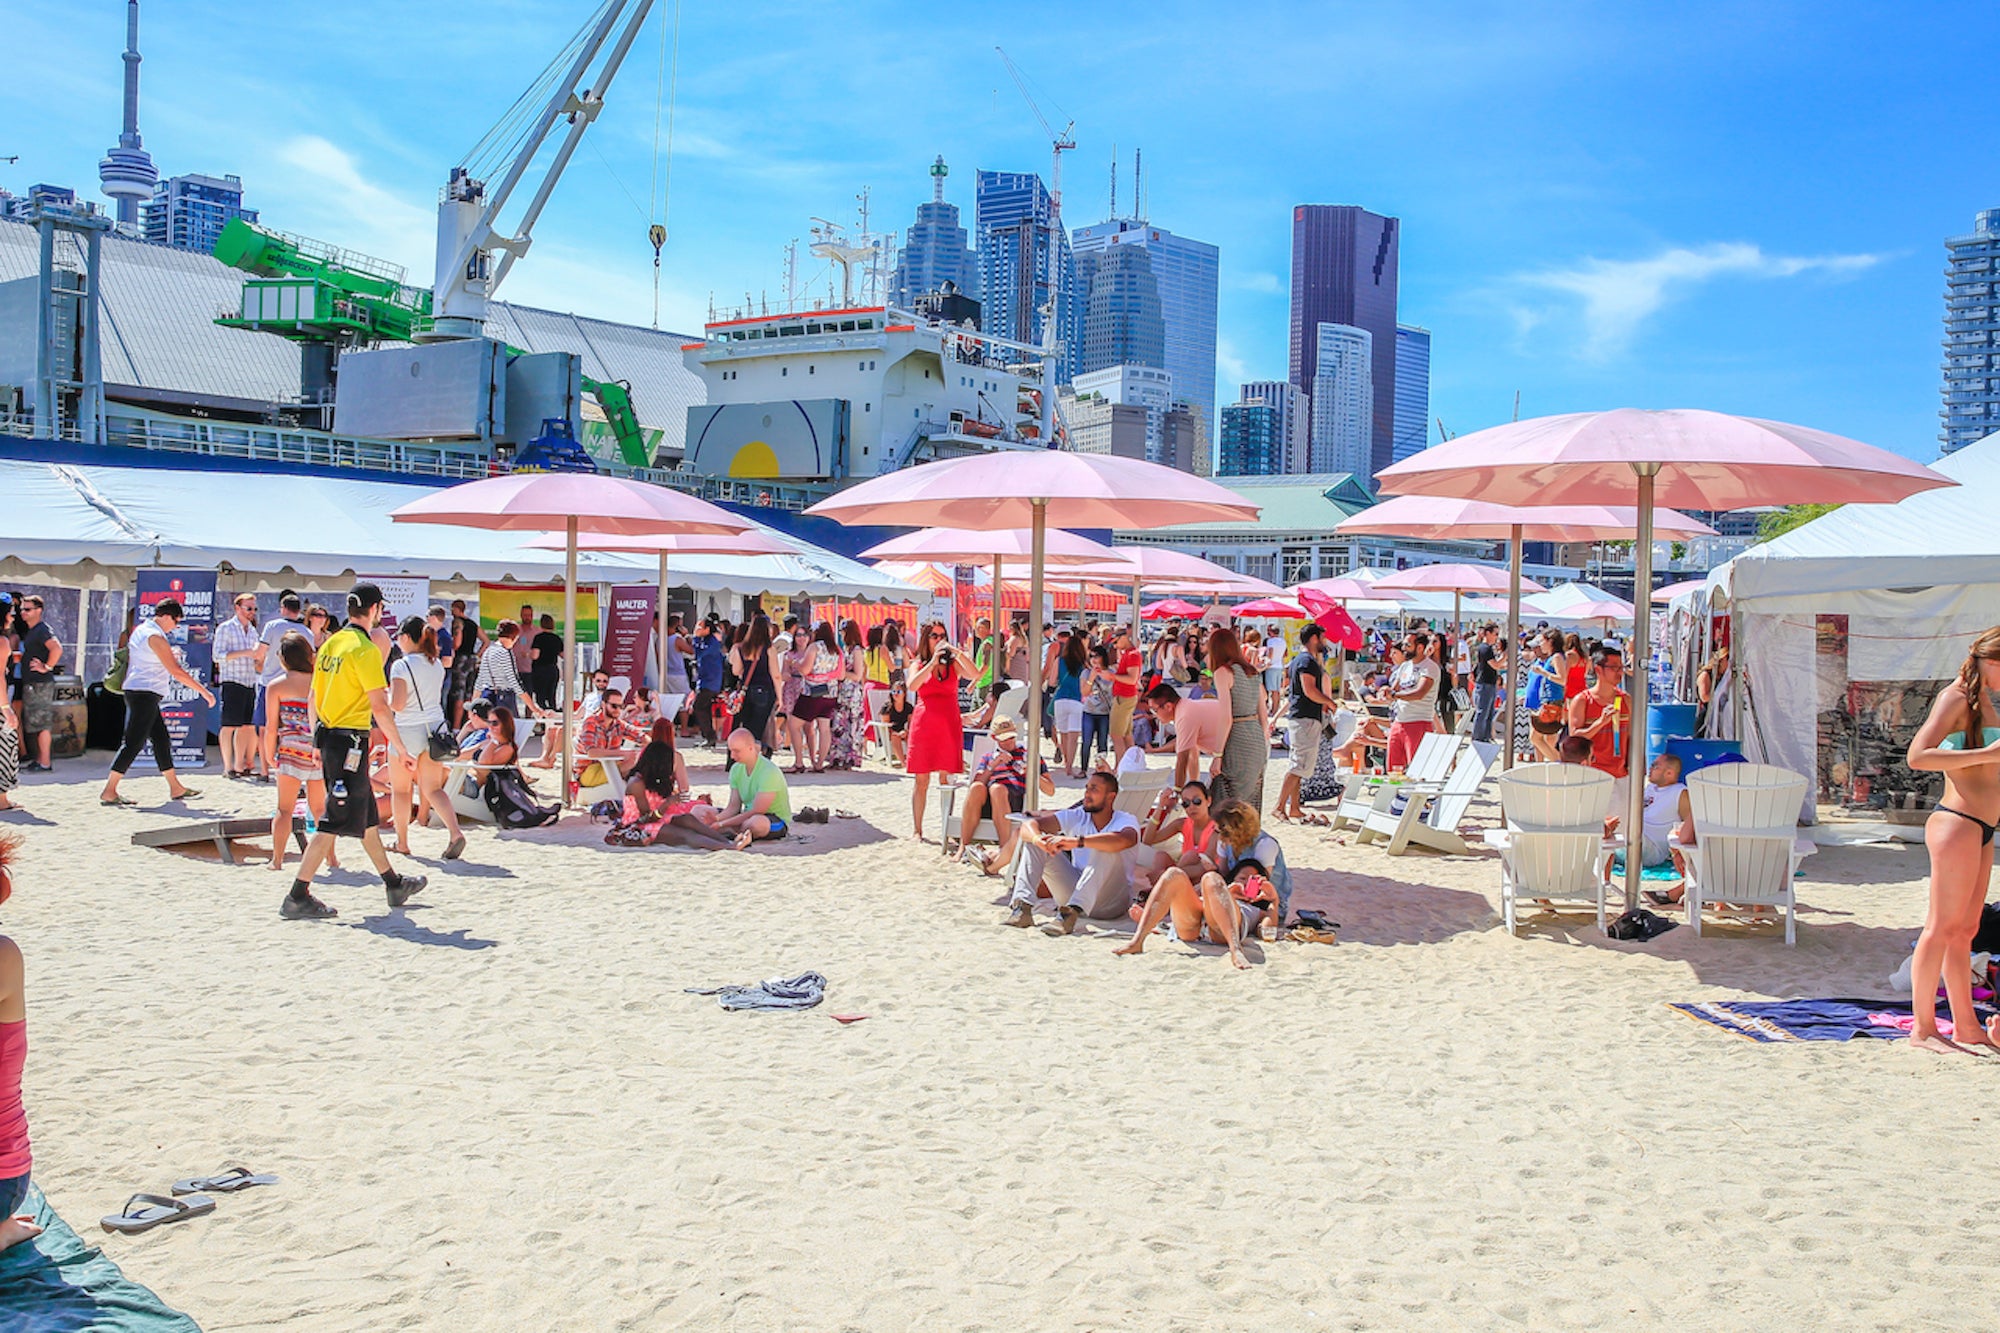 groups of people enjoying a summer day at a festival on a sandy beach with pink umbrellas